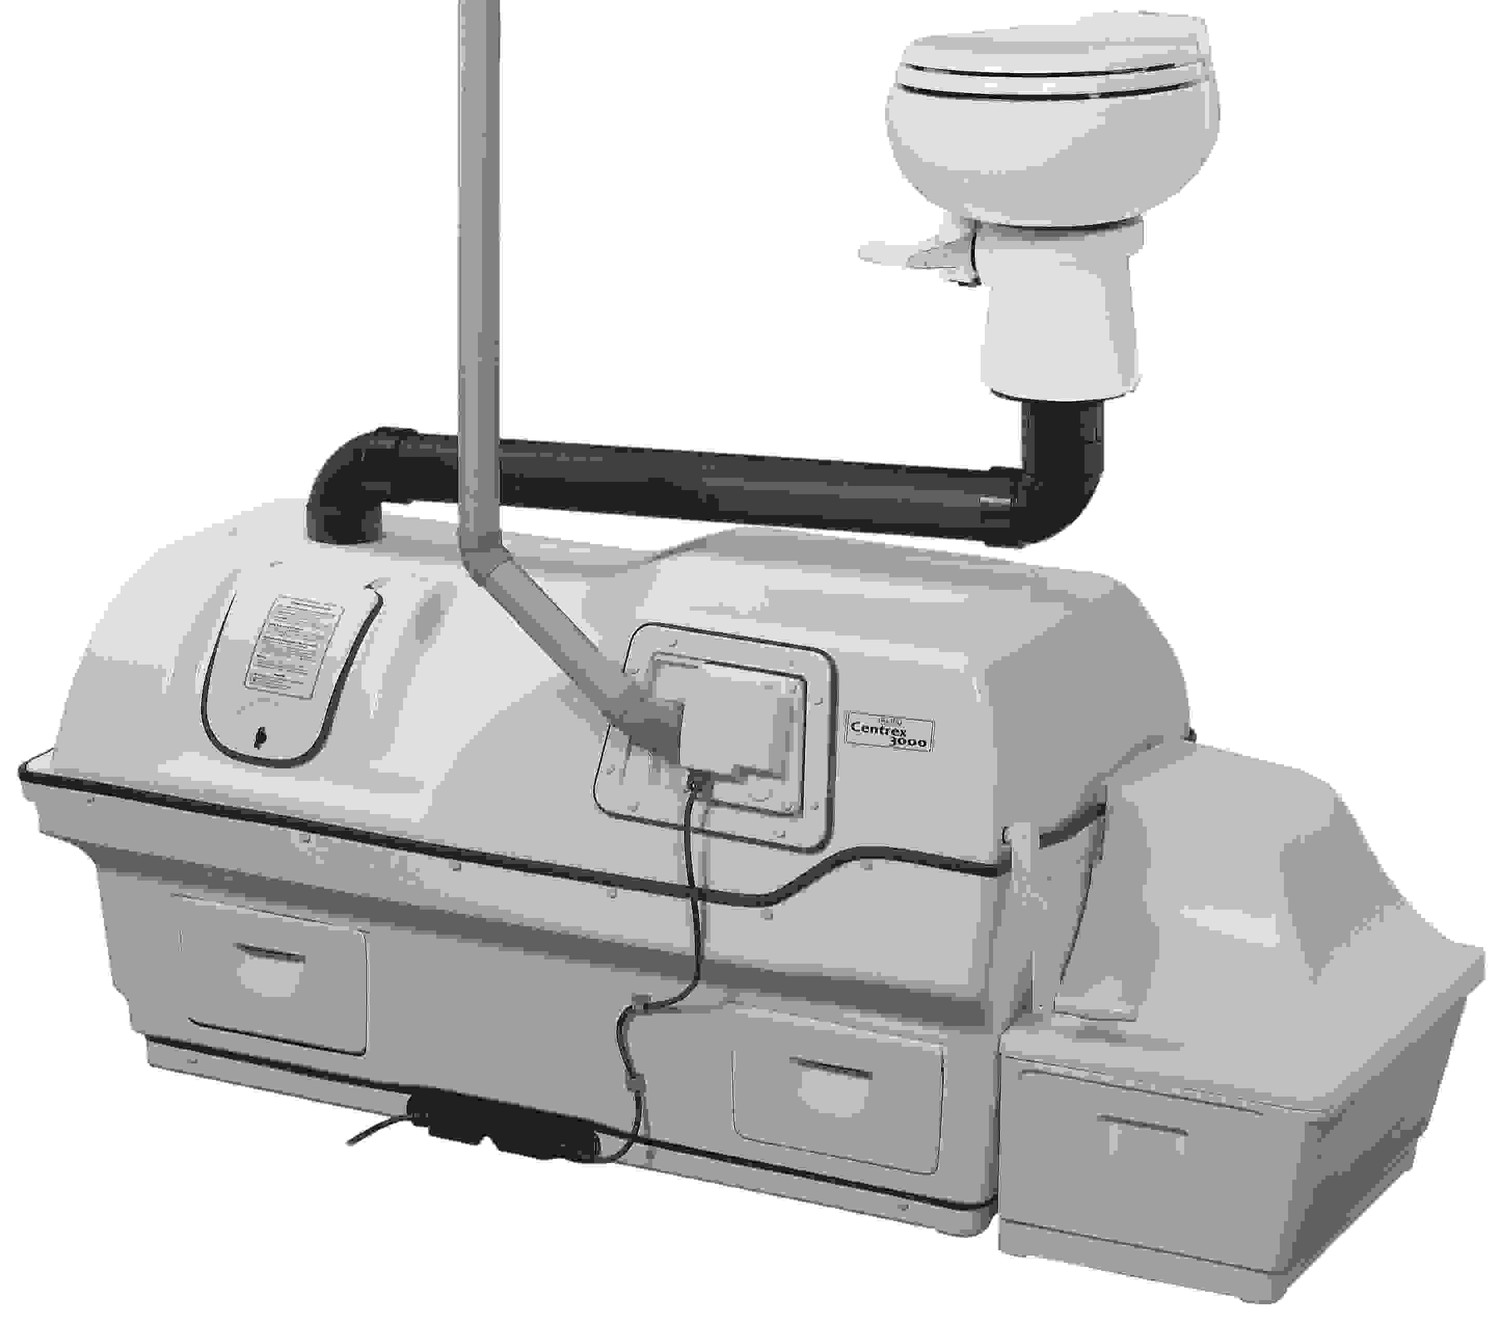 Centrex 3000 Electric Composting Toilet System